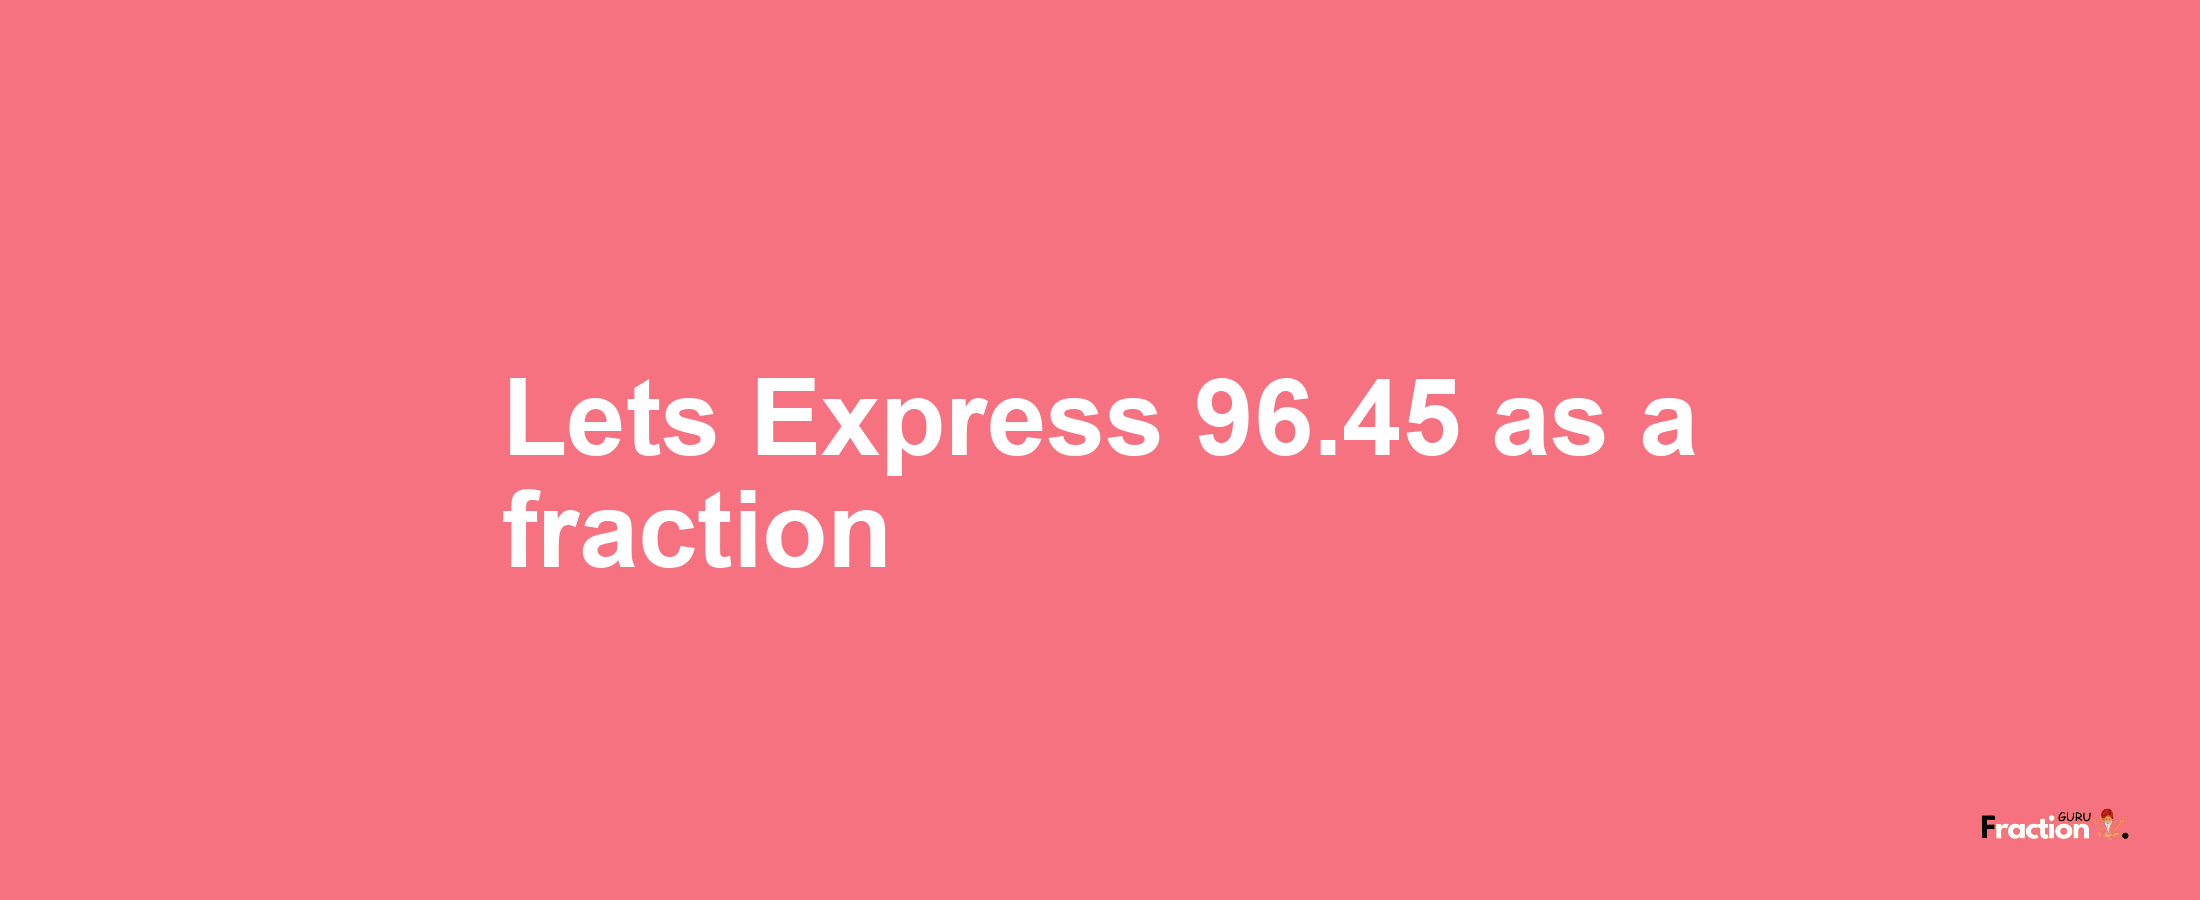 Lets Express 96.45 as afraction